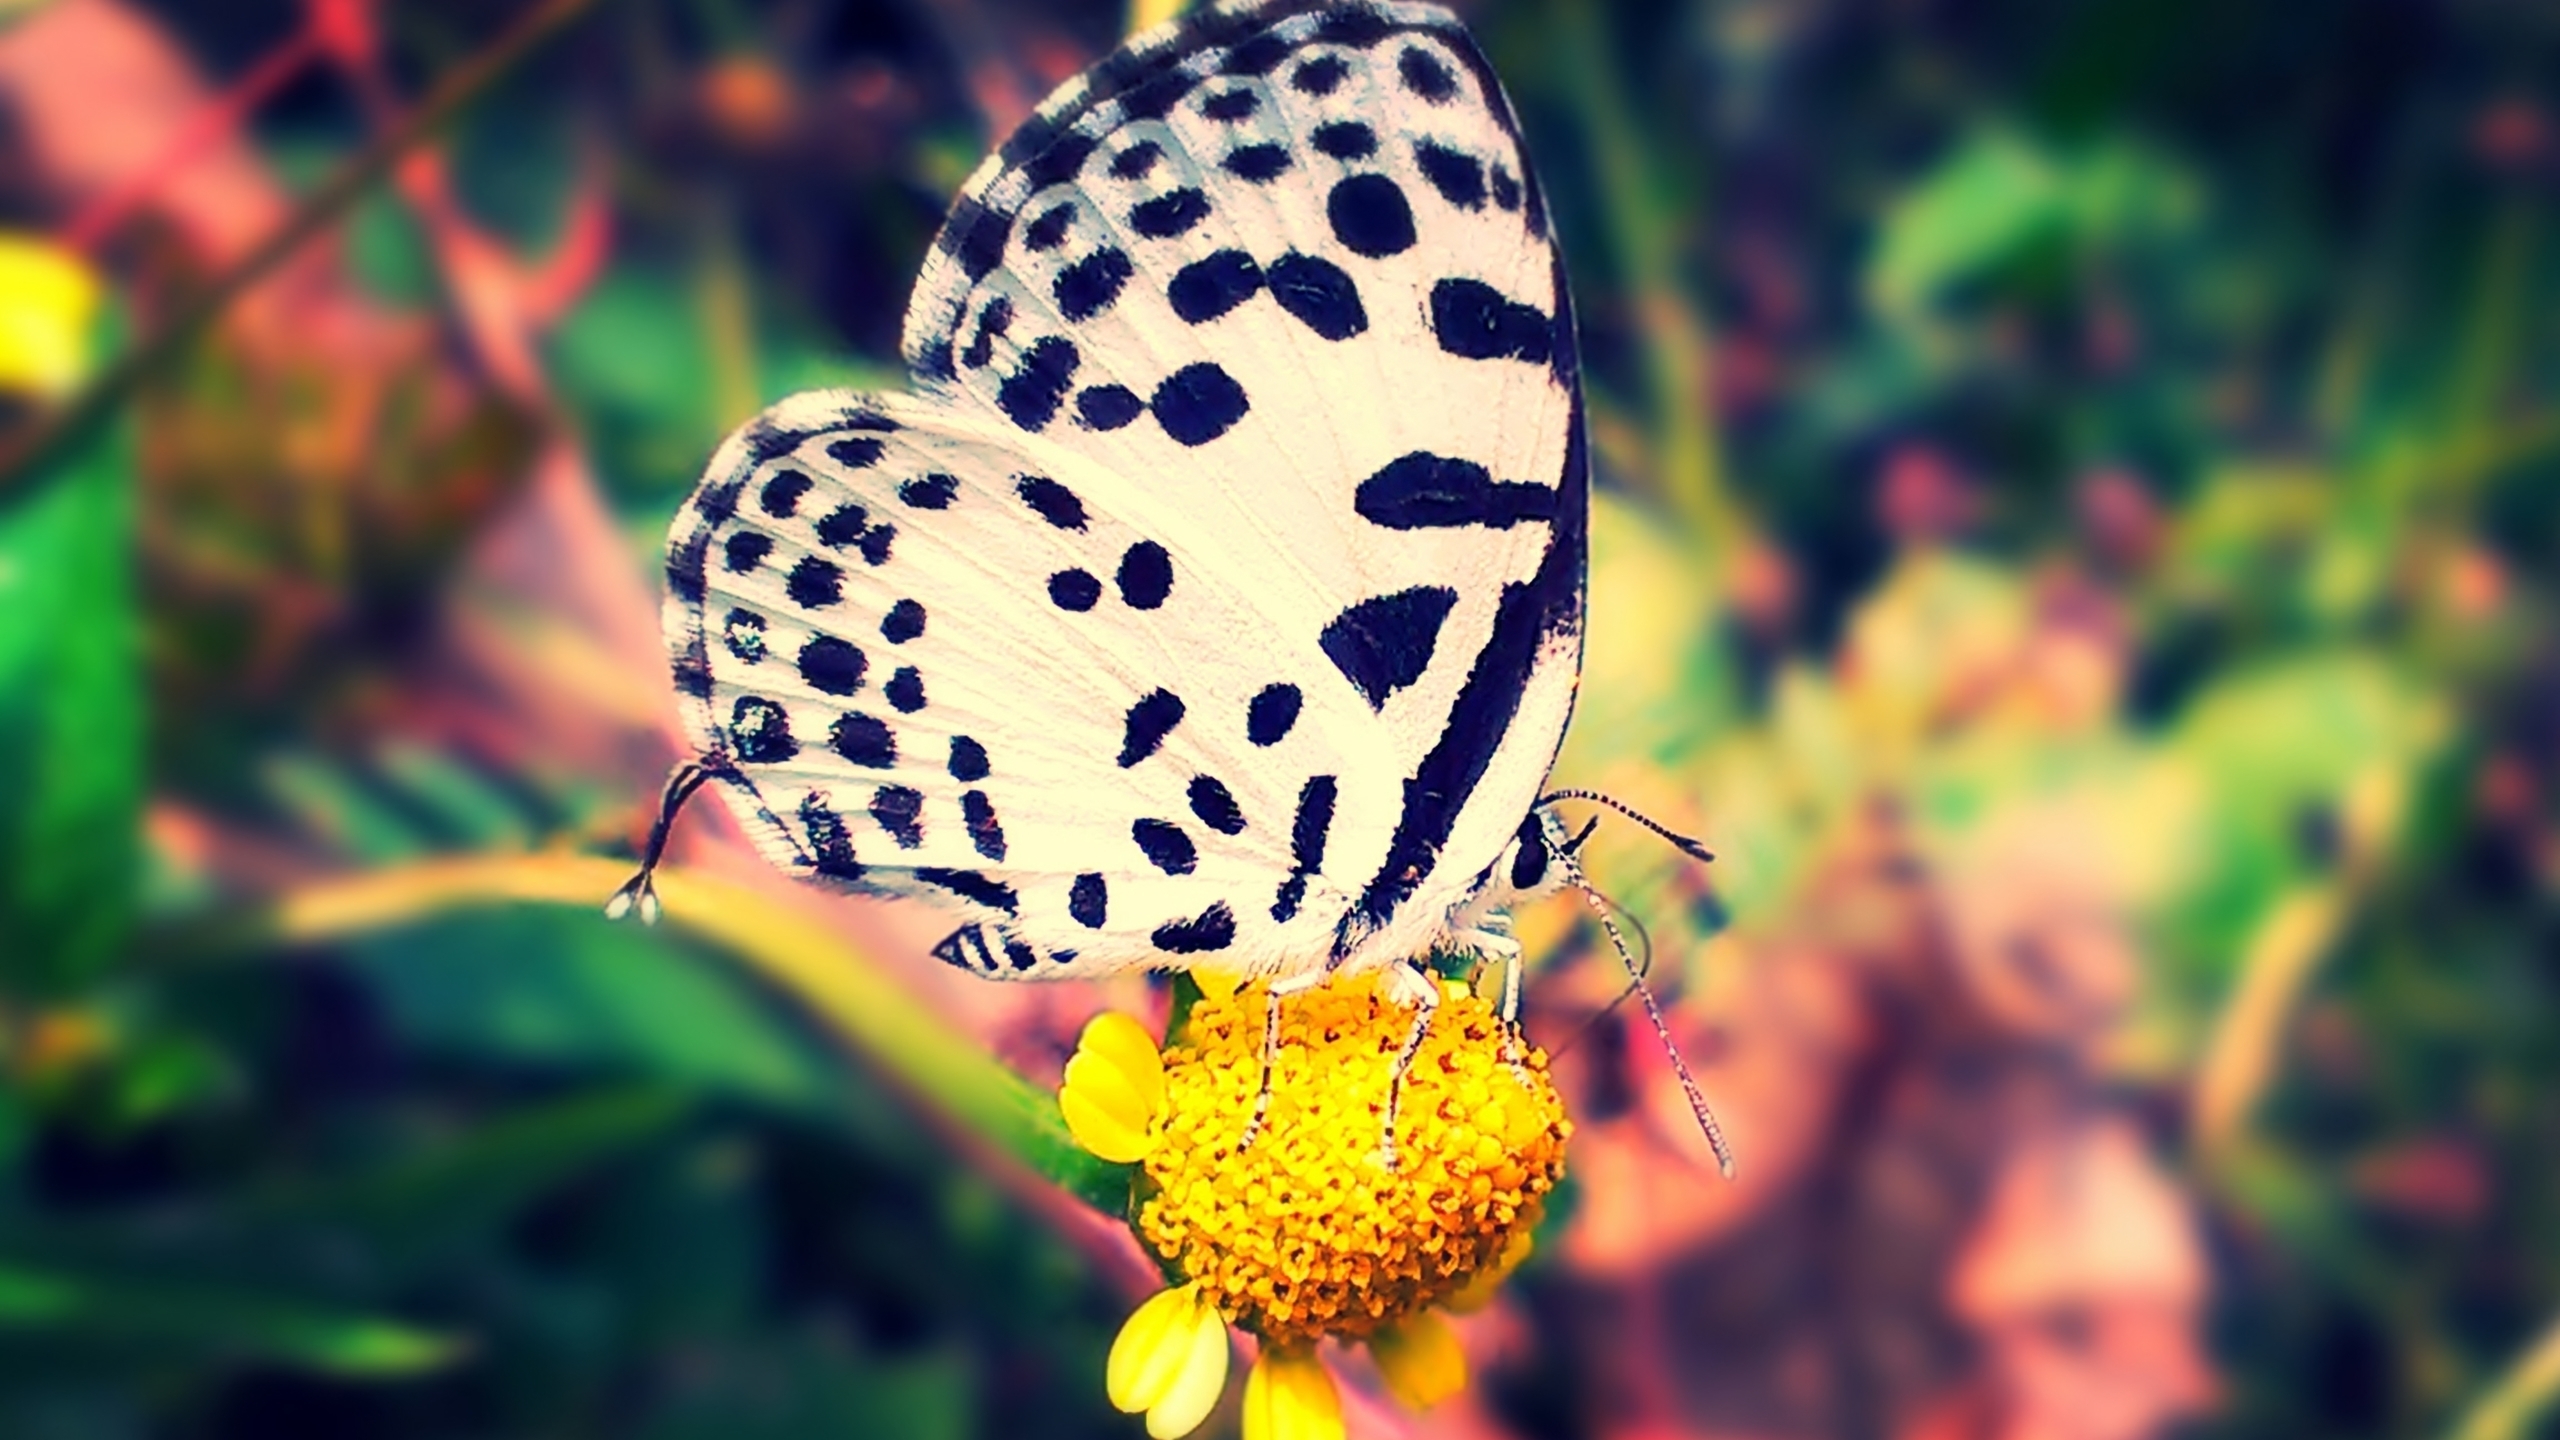 White Violet Butterfly for 2560x1440 HDTV resolution